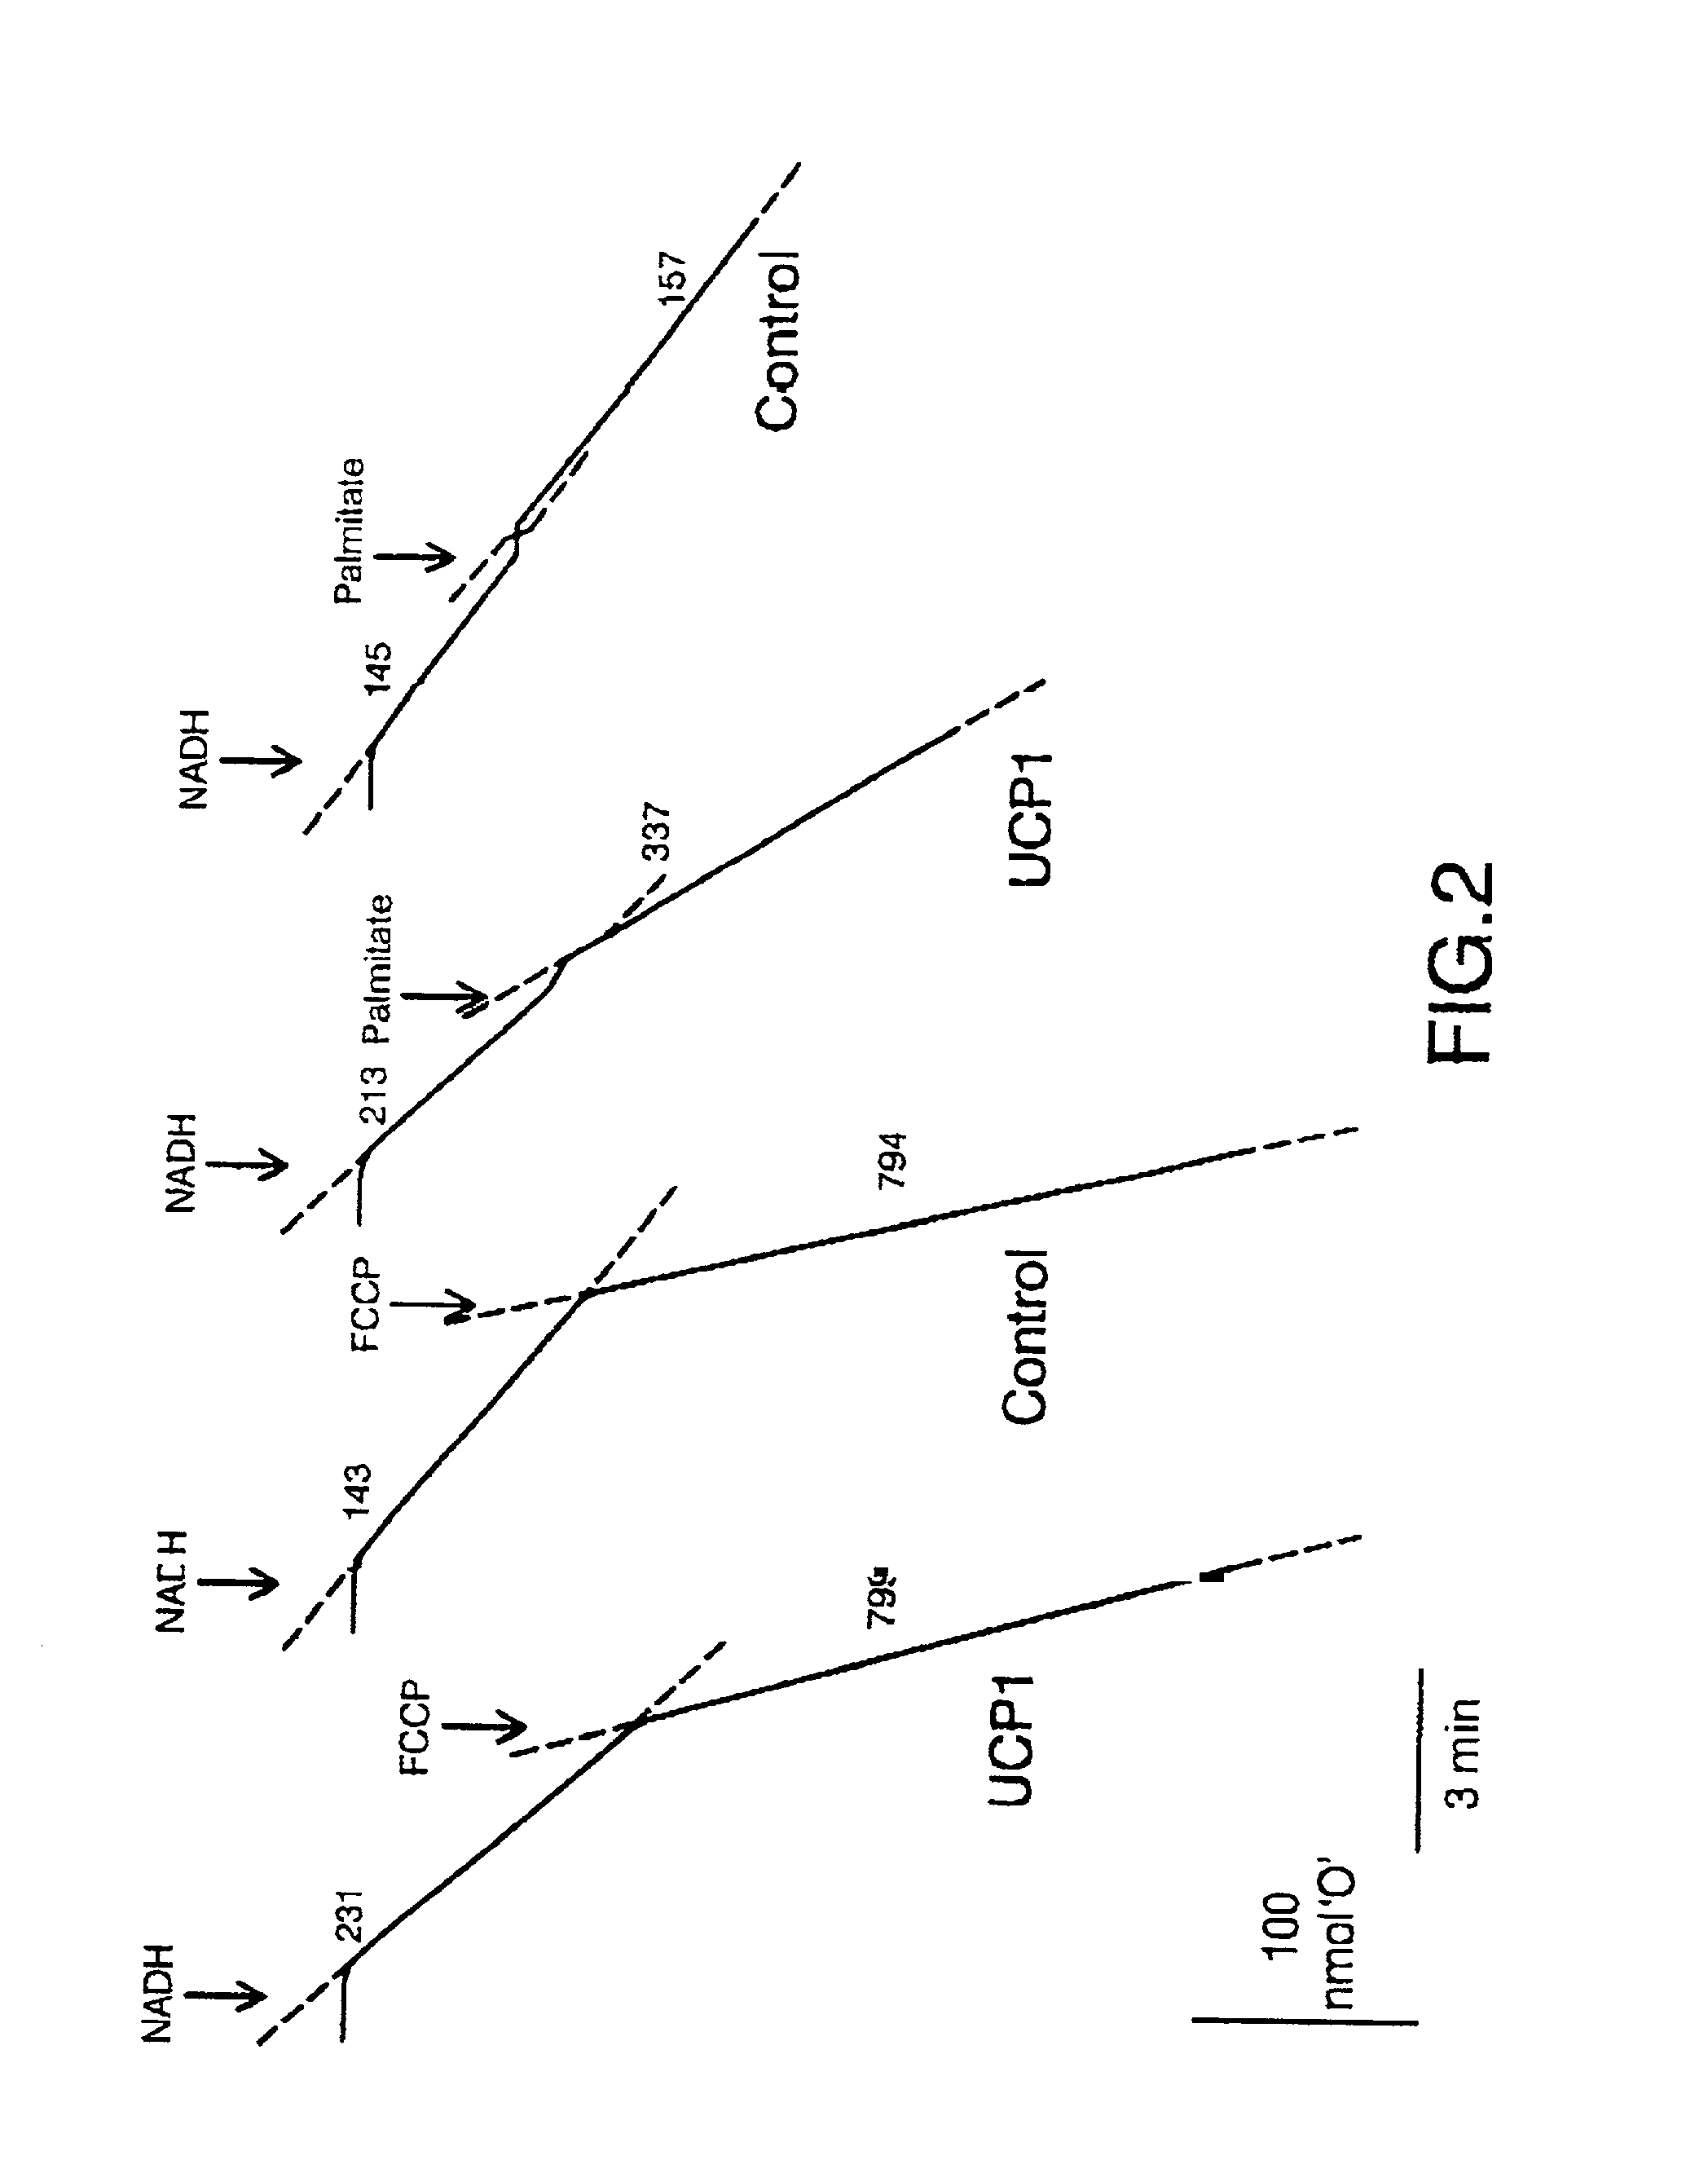 Method for determining the activity of uncoupling proteins (UCPs) by monitoring NAD(P)H consumption